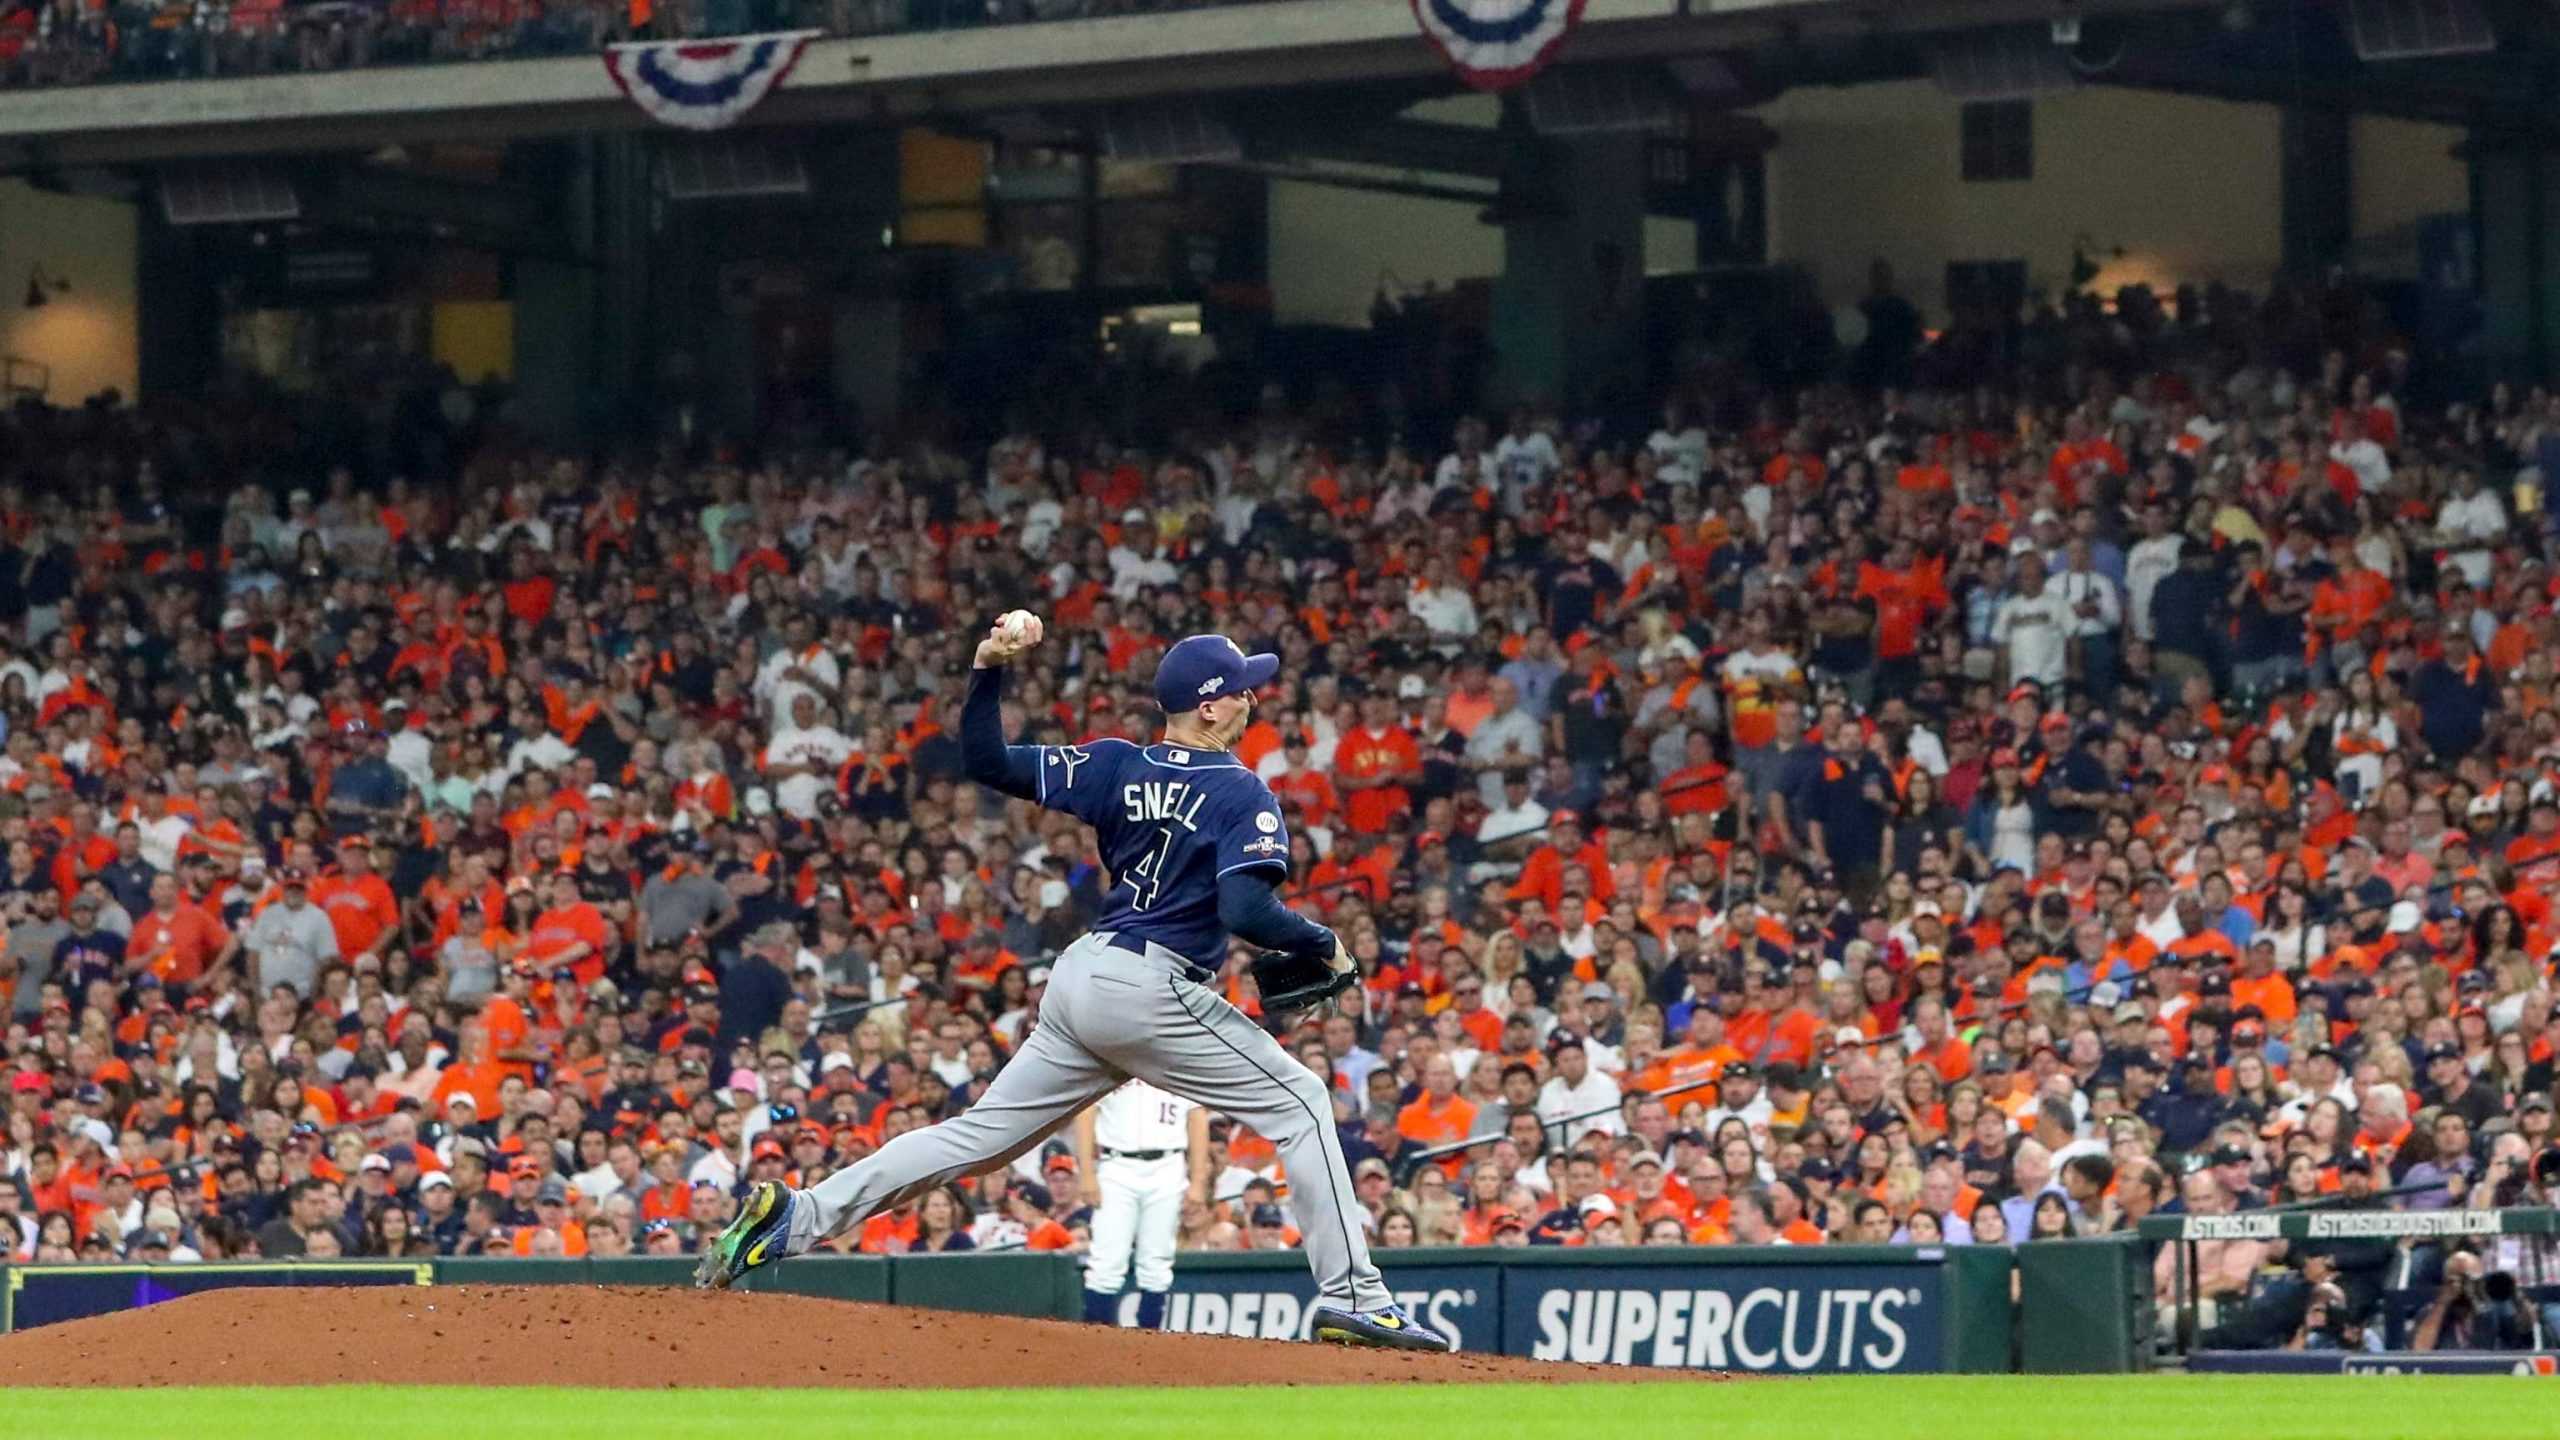 Tampa Bay Rays starting pitcher Blake Snell  delivers a pitch in the fourth inning against the Houston Astros in Game 5 of the American League Division Series on Oct. 10 in Houston. DIRK SHADD  |  Times